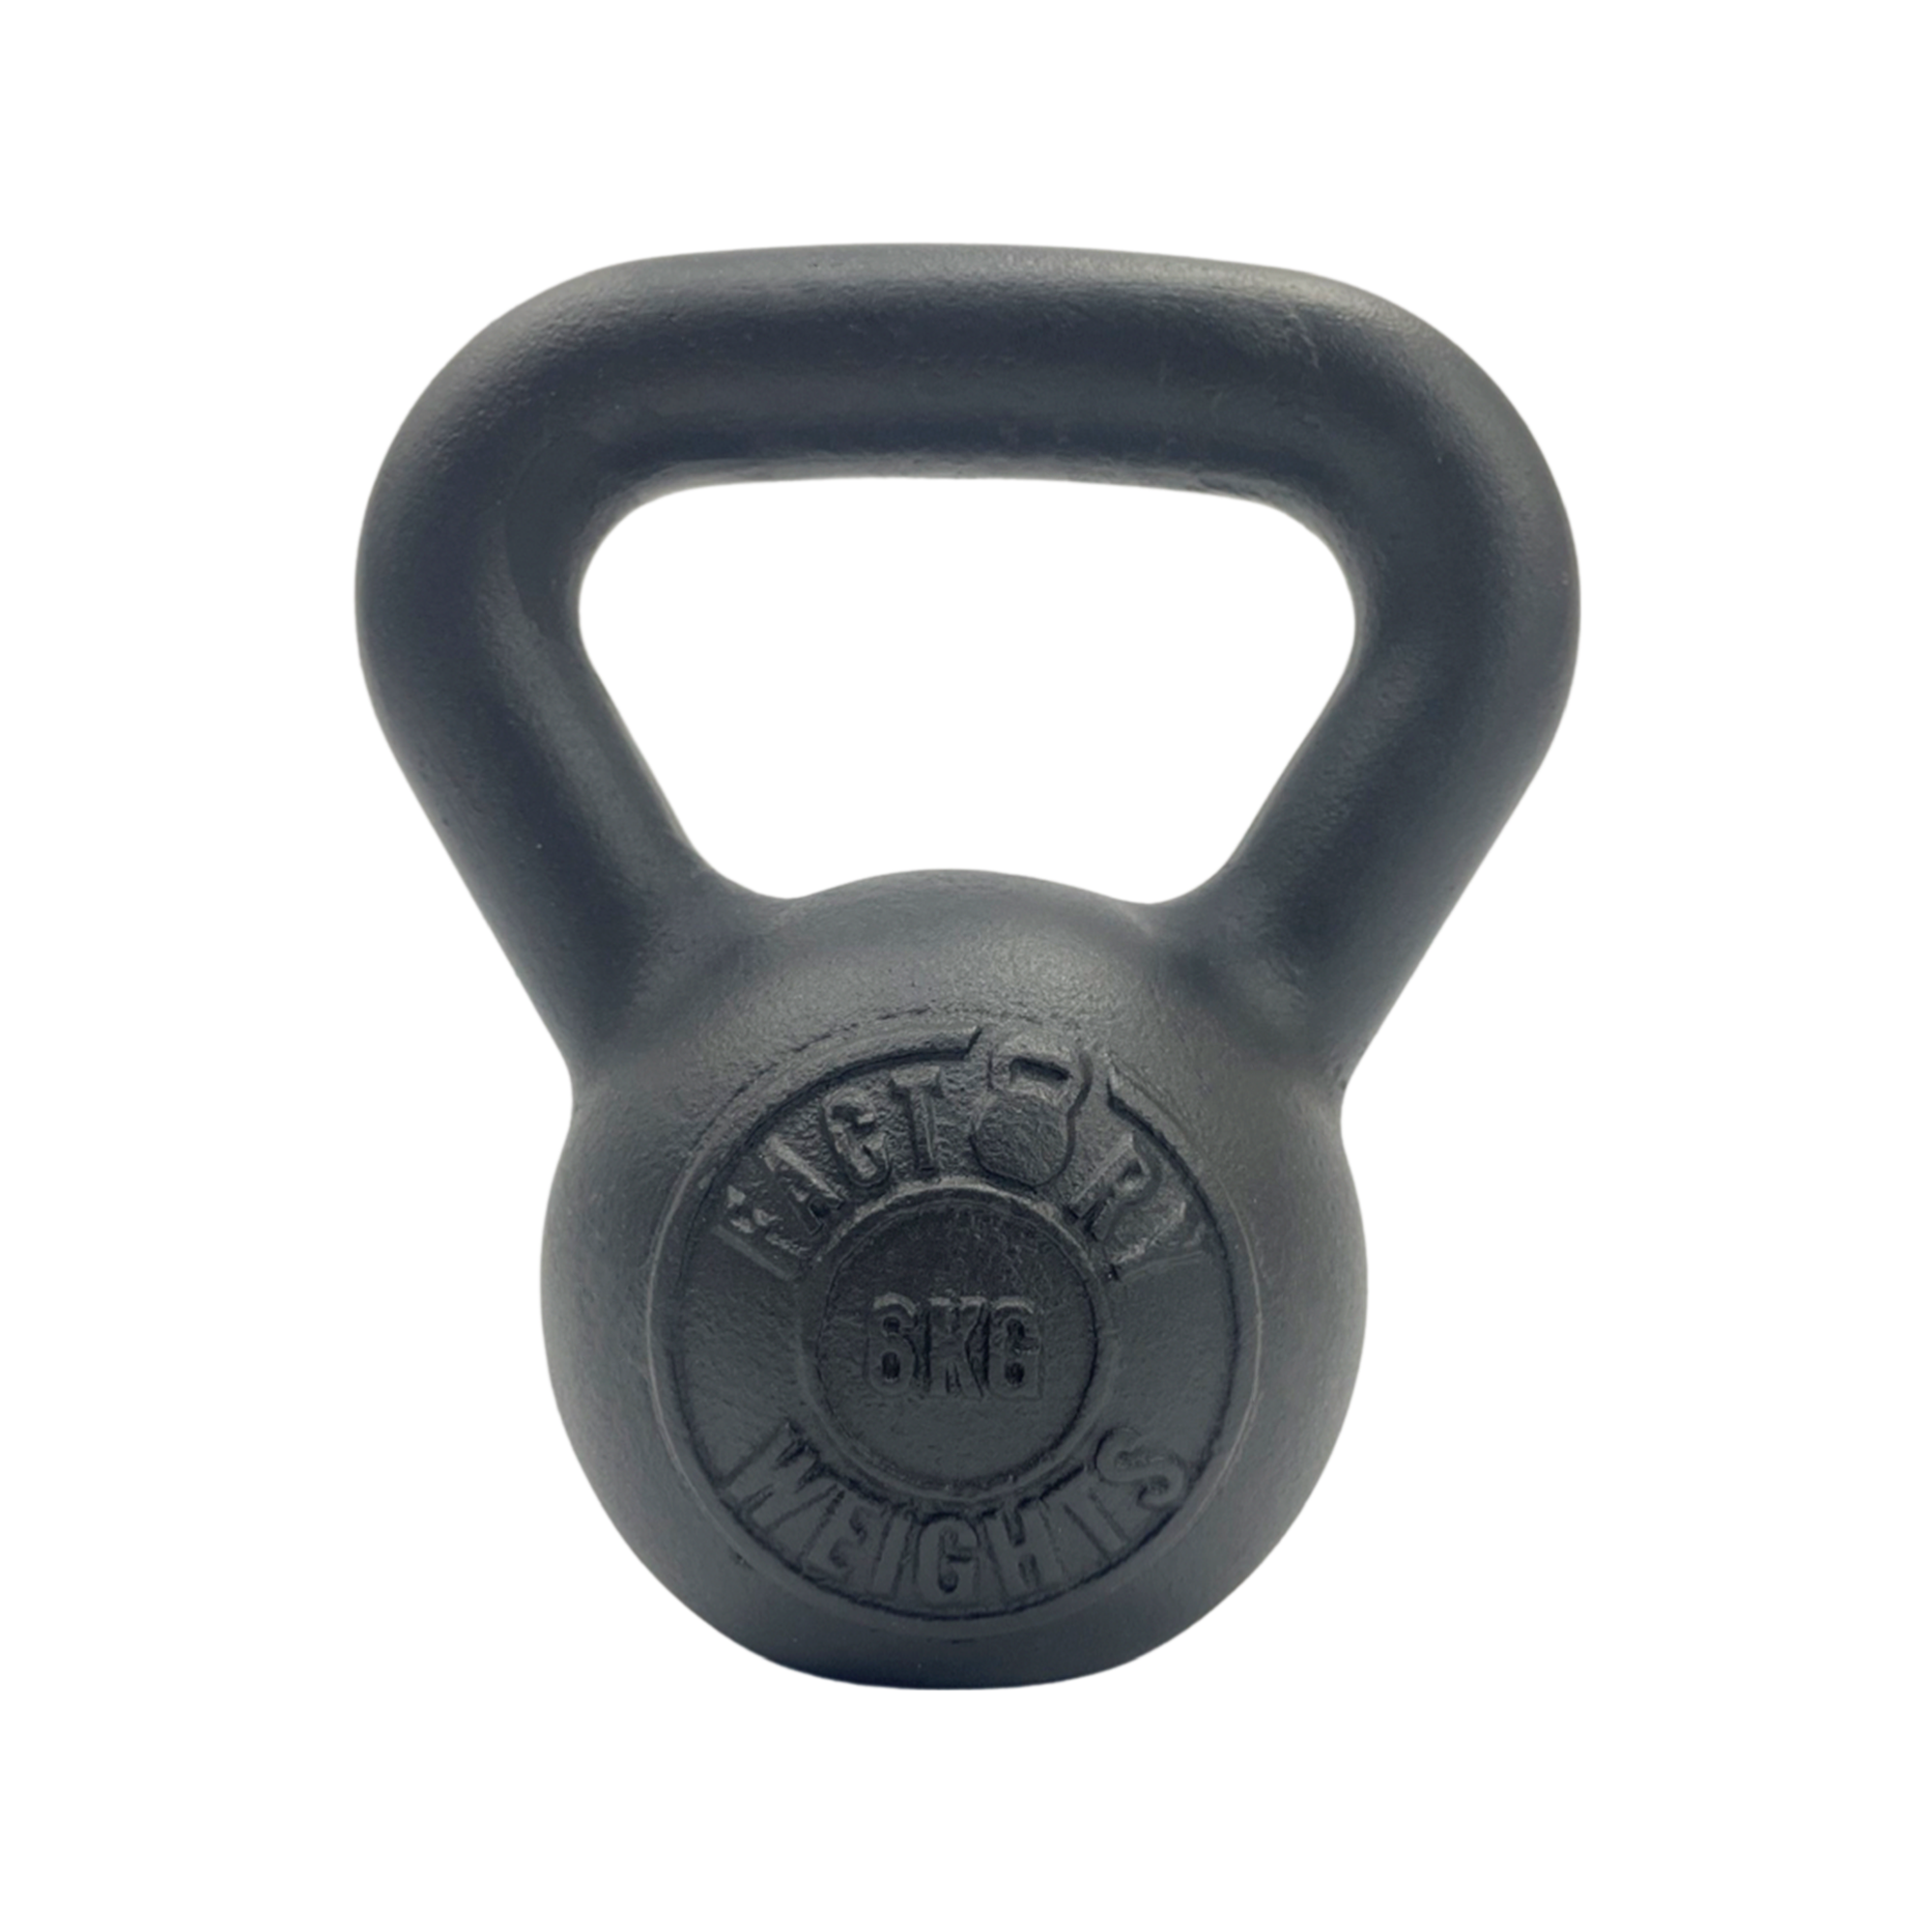 6kg Pro Forged Kettlebell